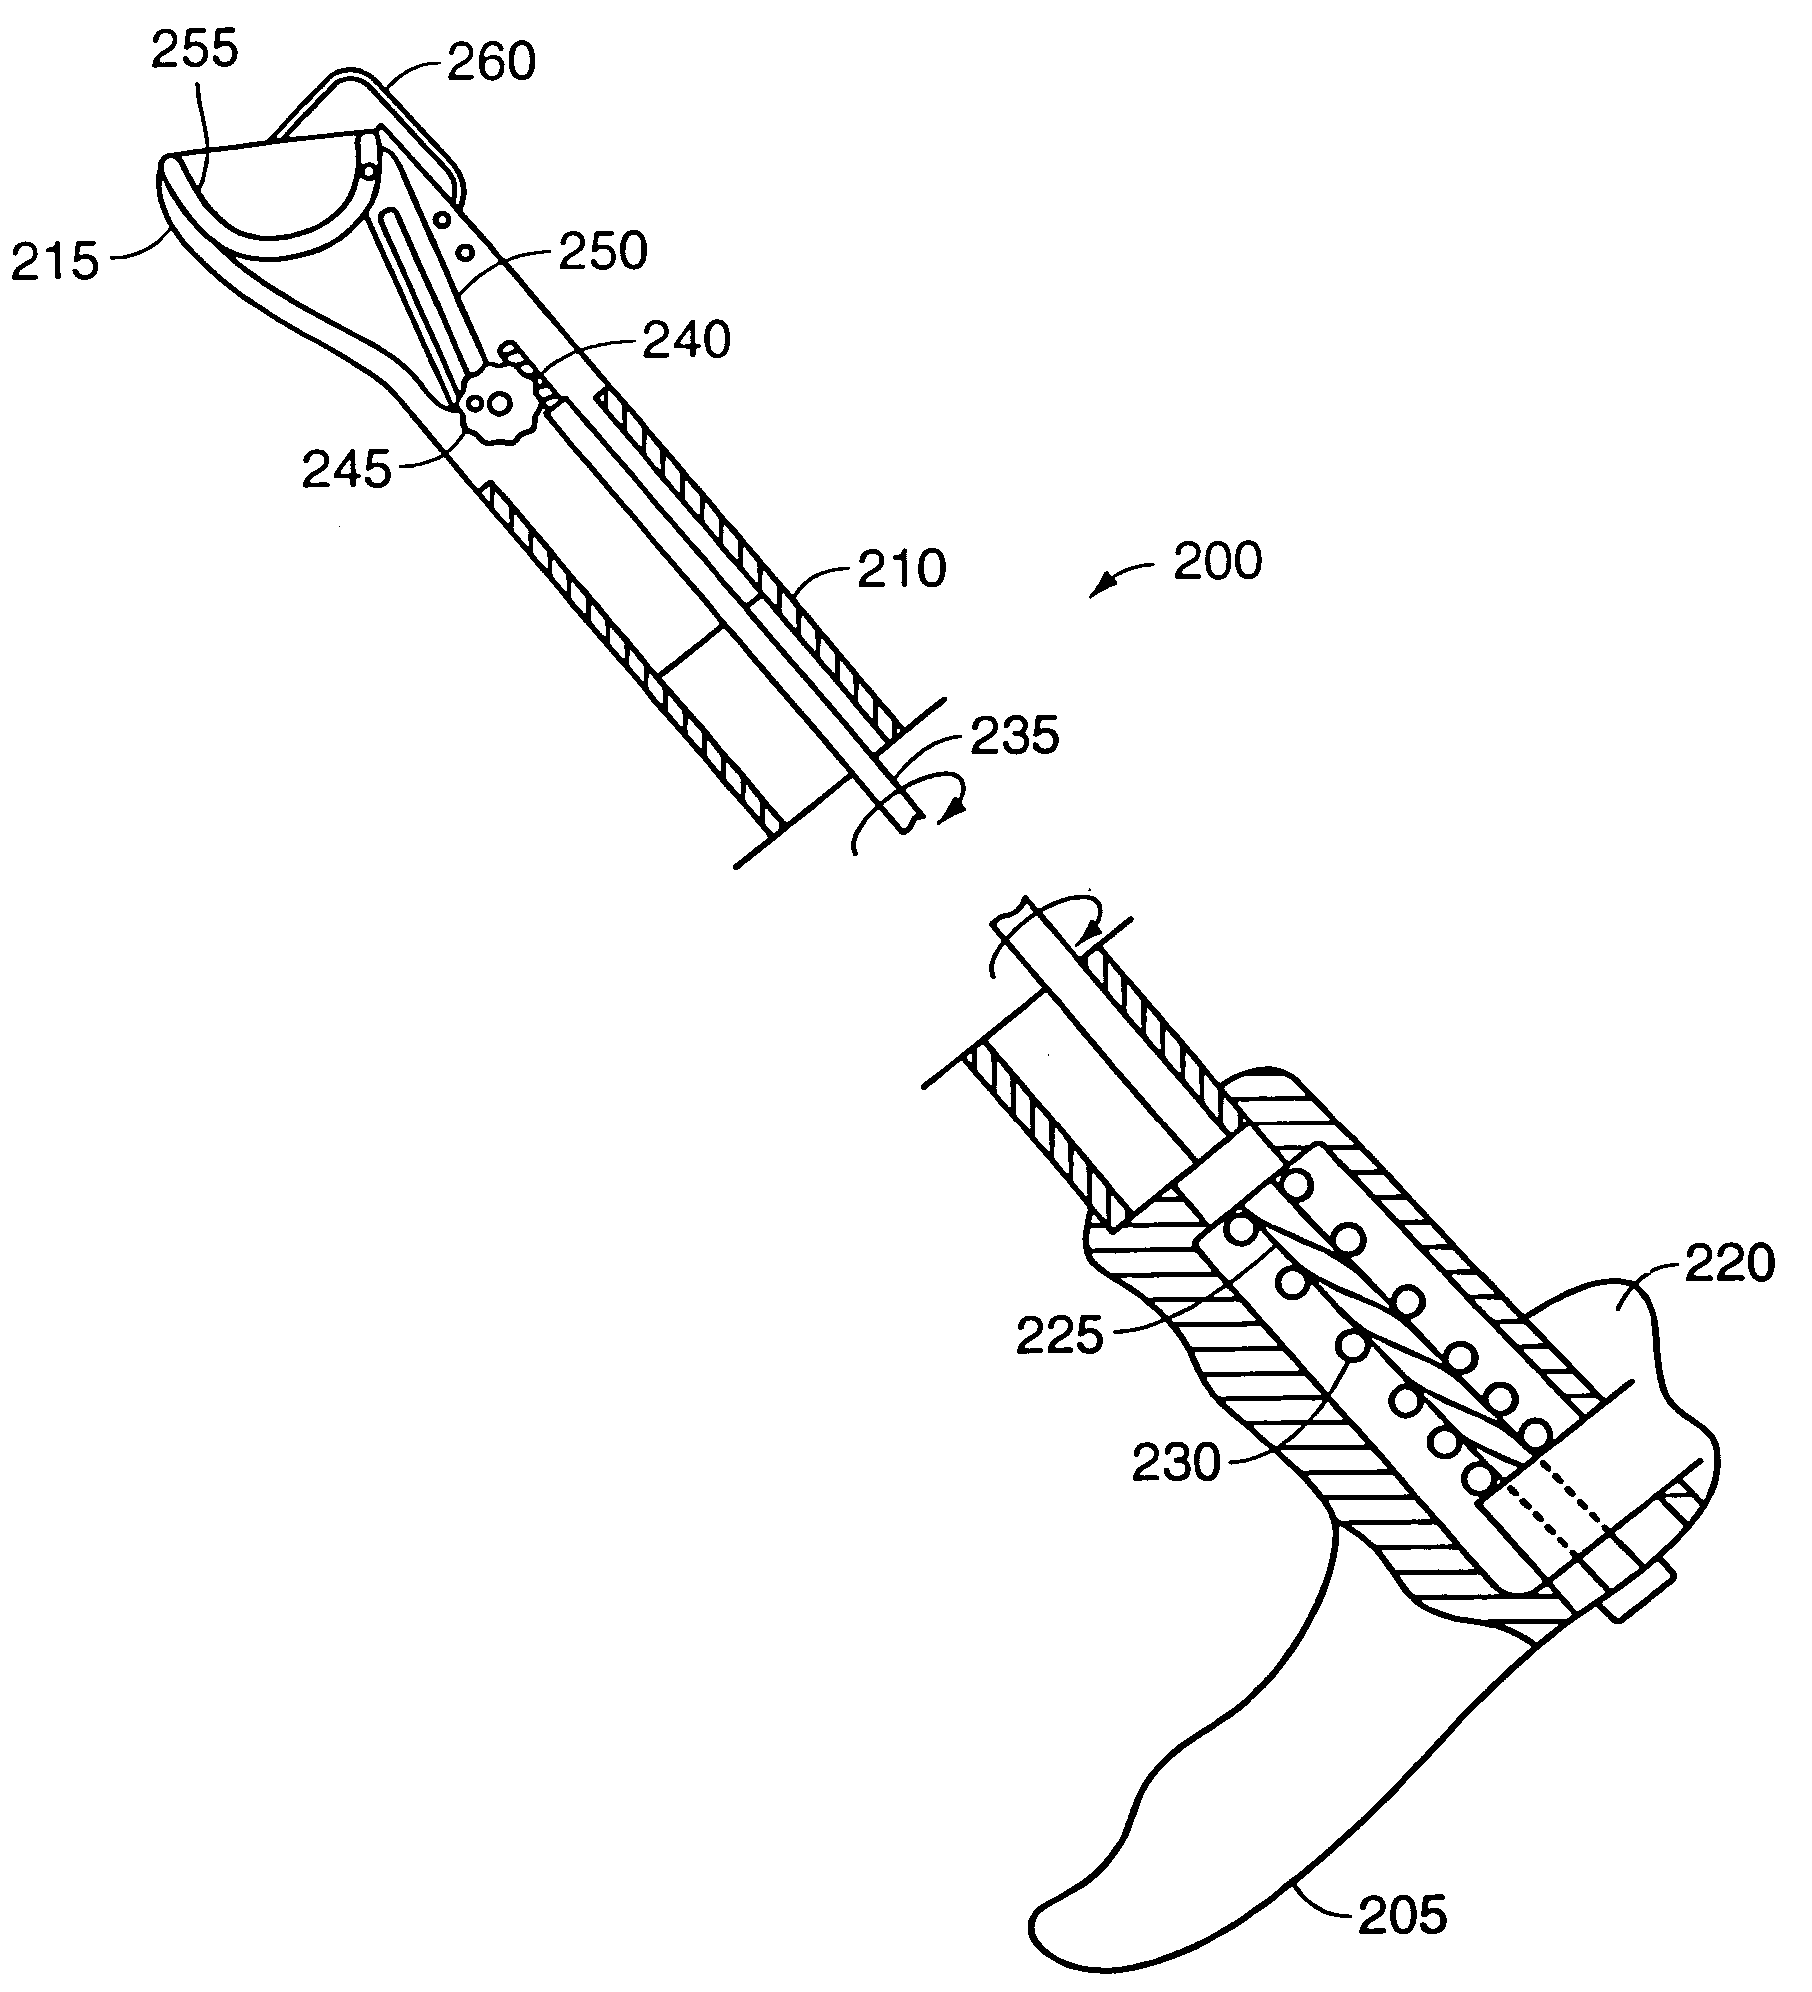 Forward deploying suturing device and methods of use